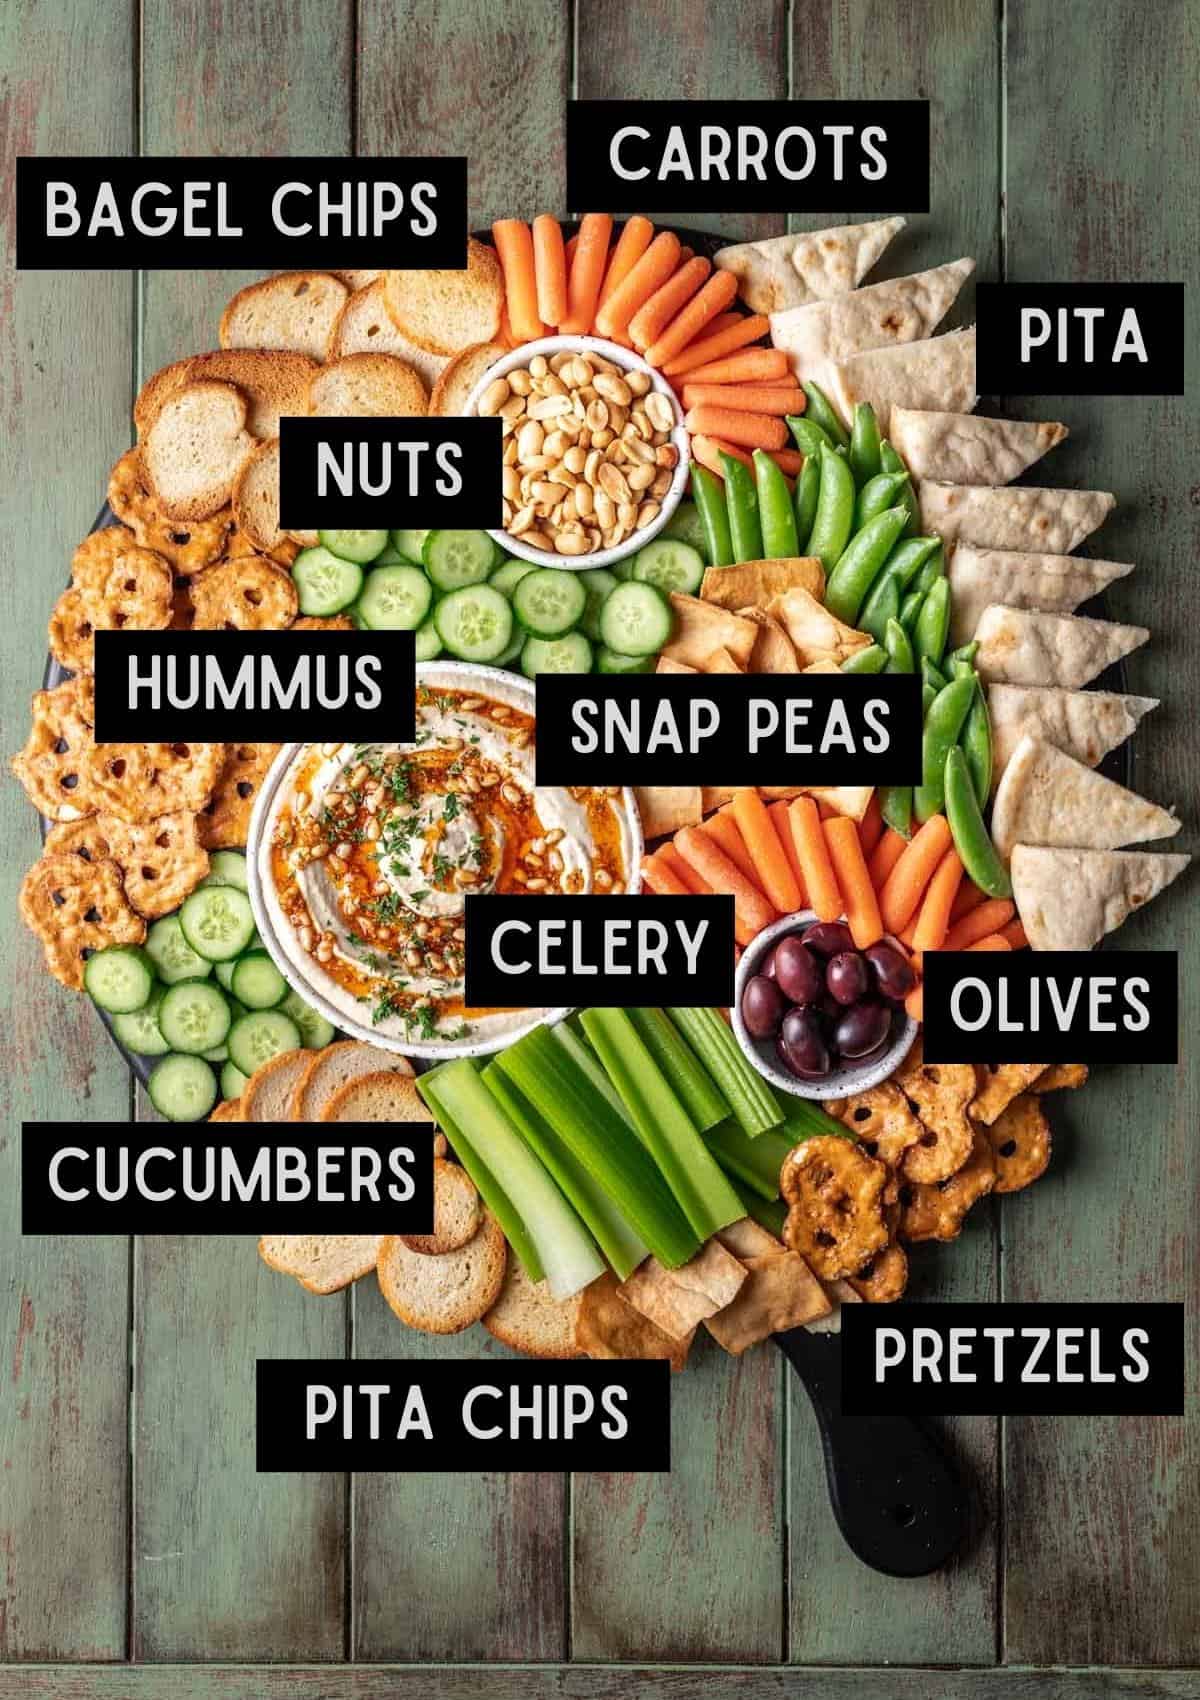 A snack board labelled to show all the snacks served with hummus.